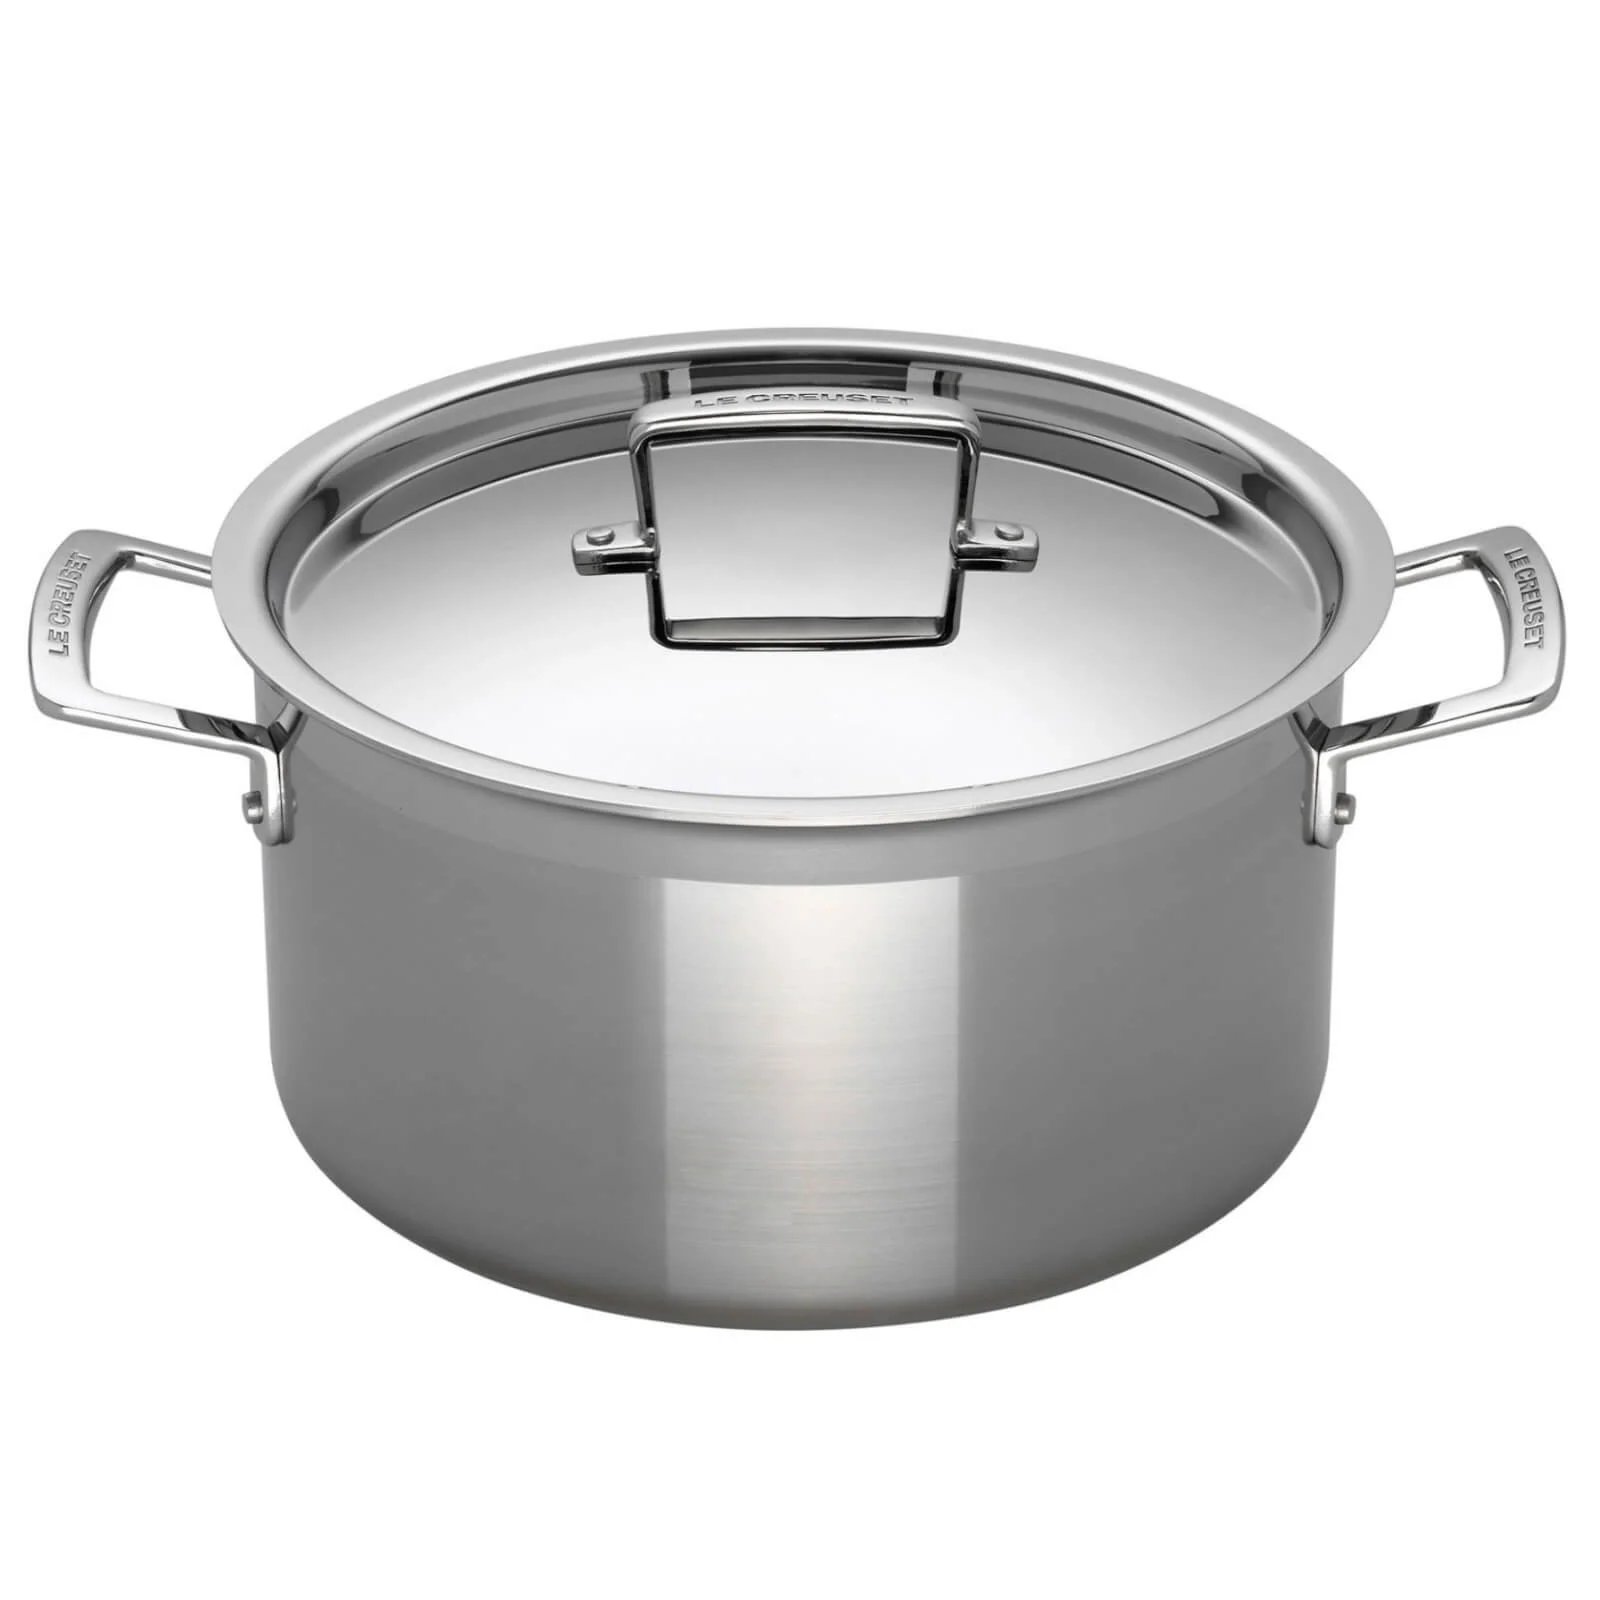 Le Creuset 3-Ply Stainless Steel Deep Casserole Dish - 20cm Image 1